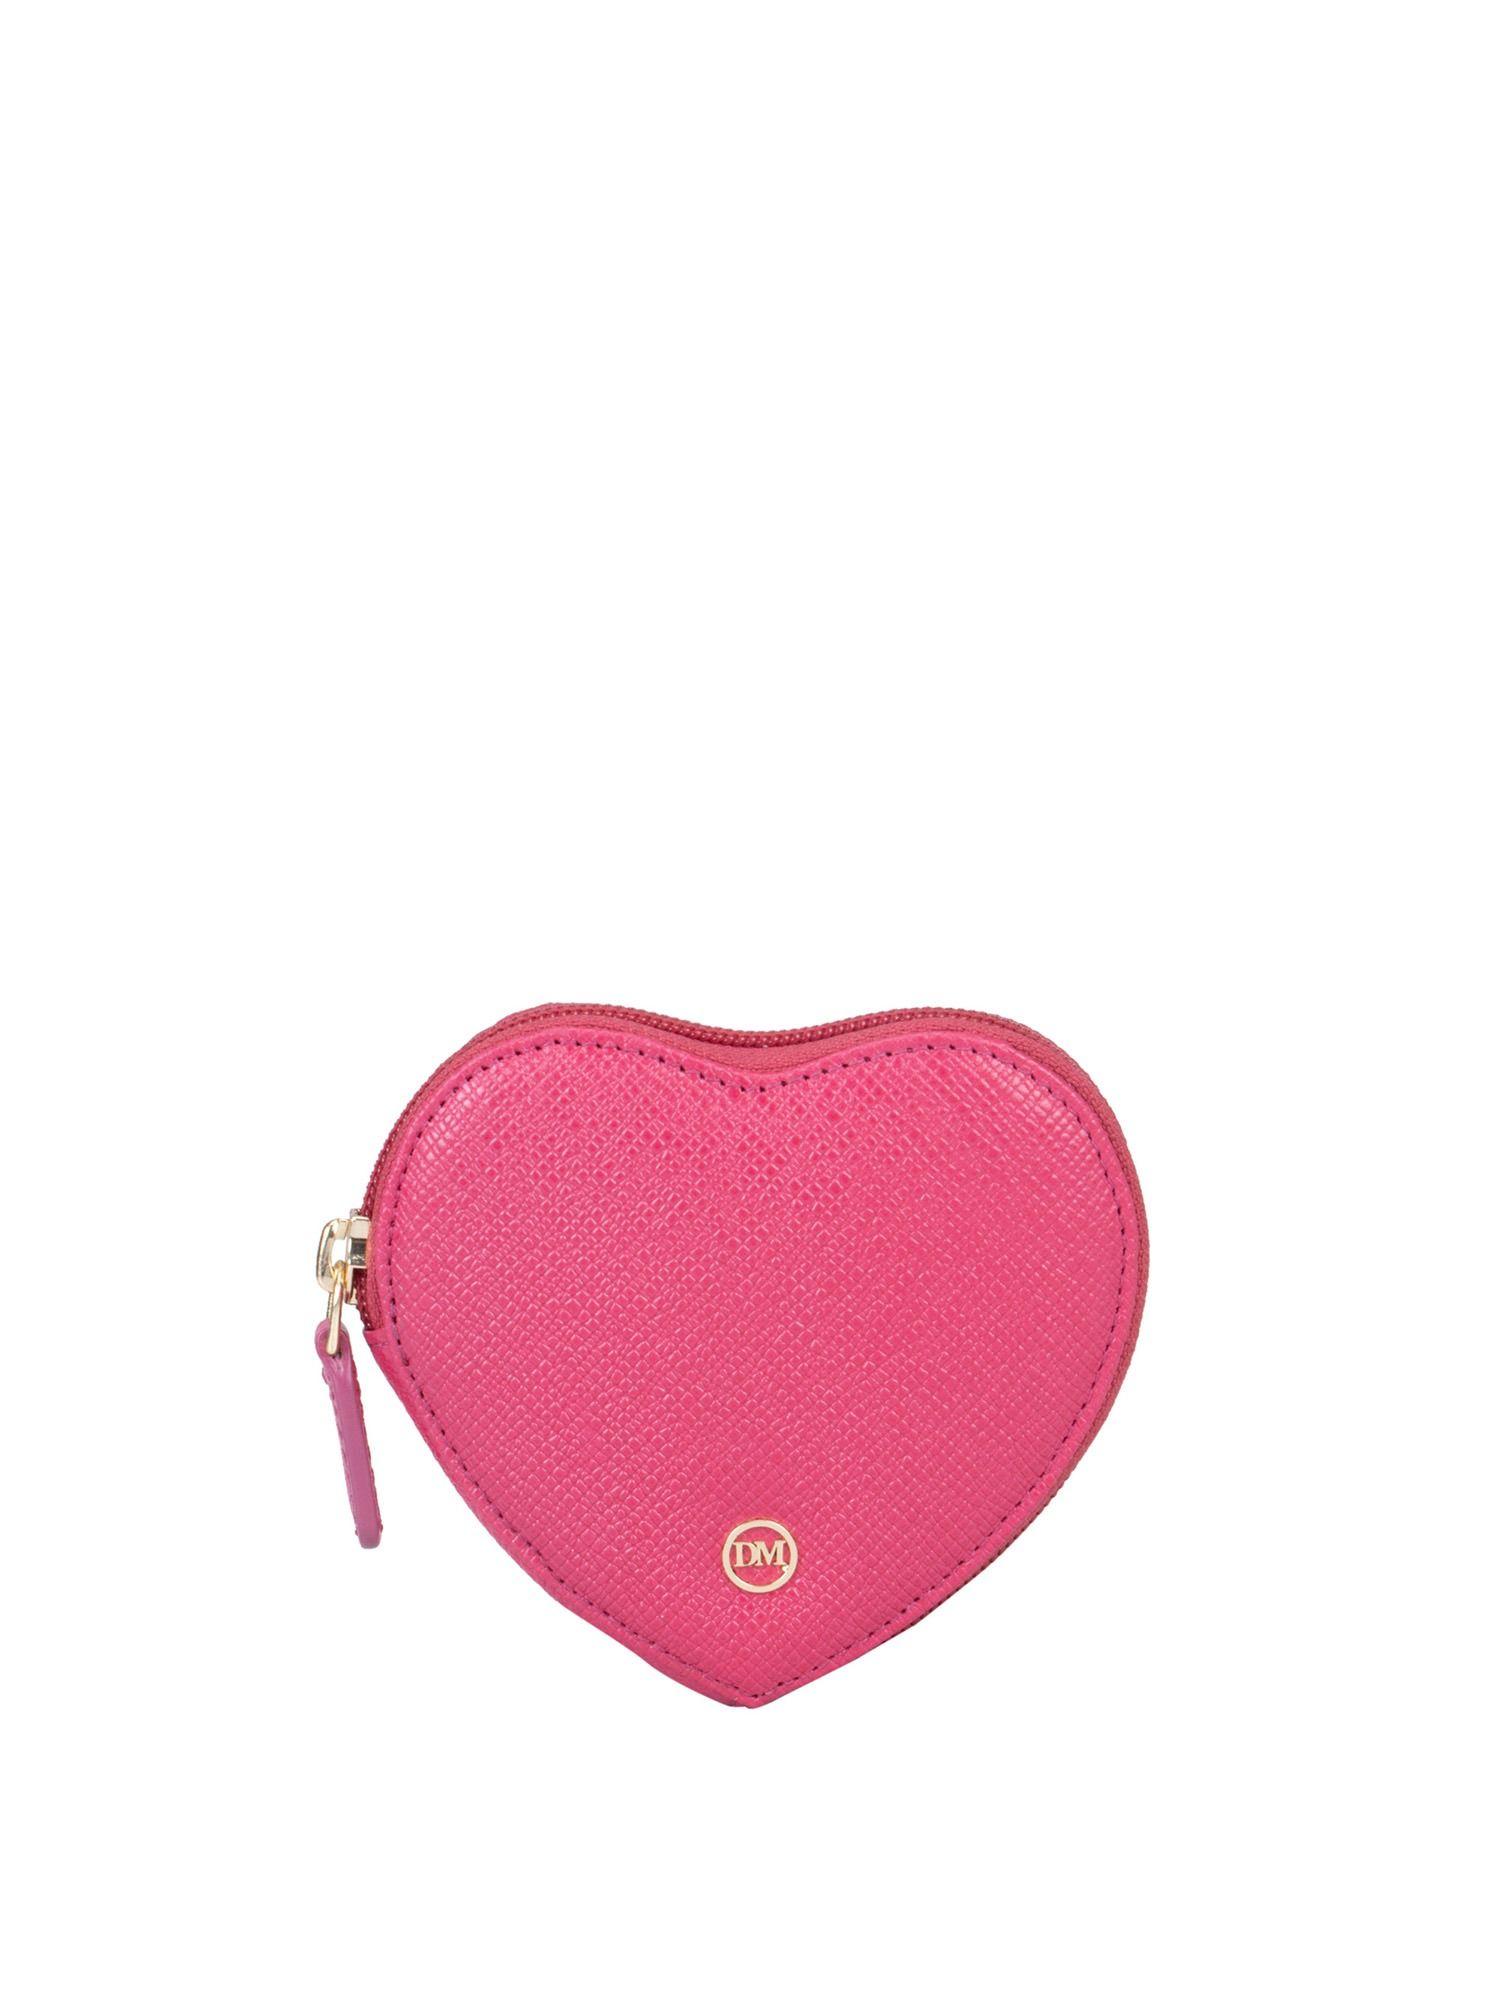 genuine leather hot pink pouch